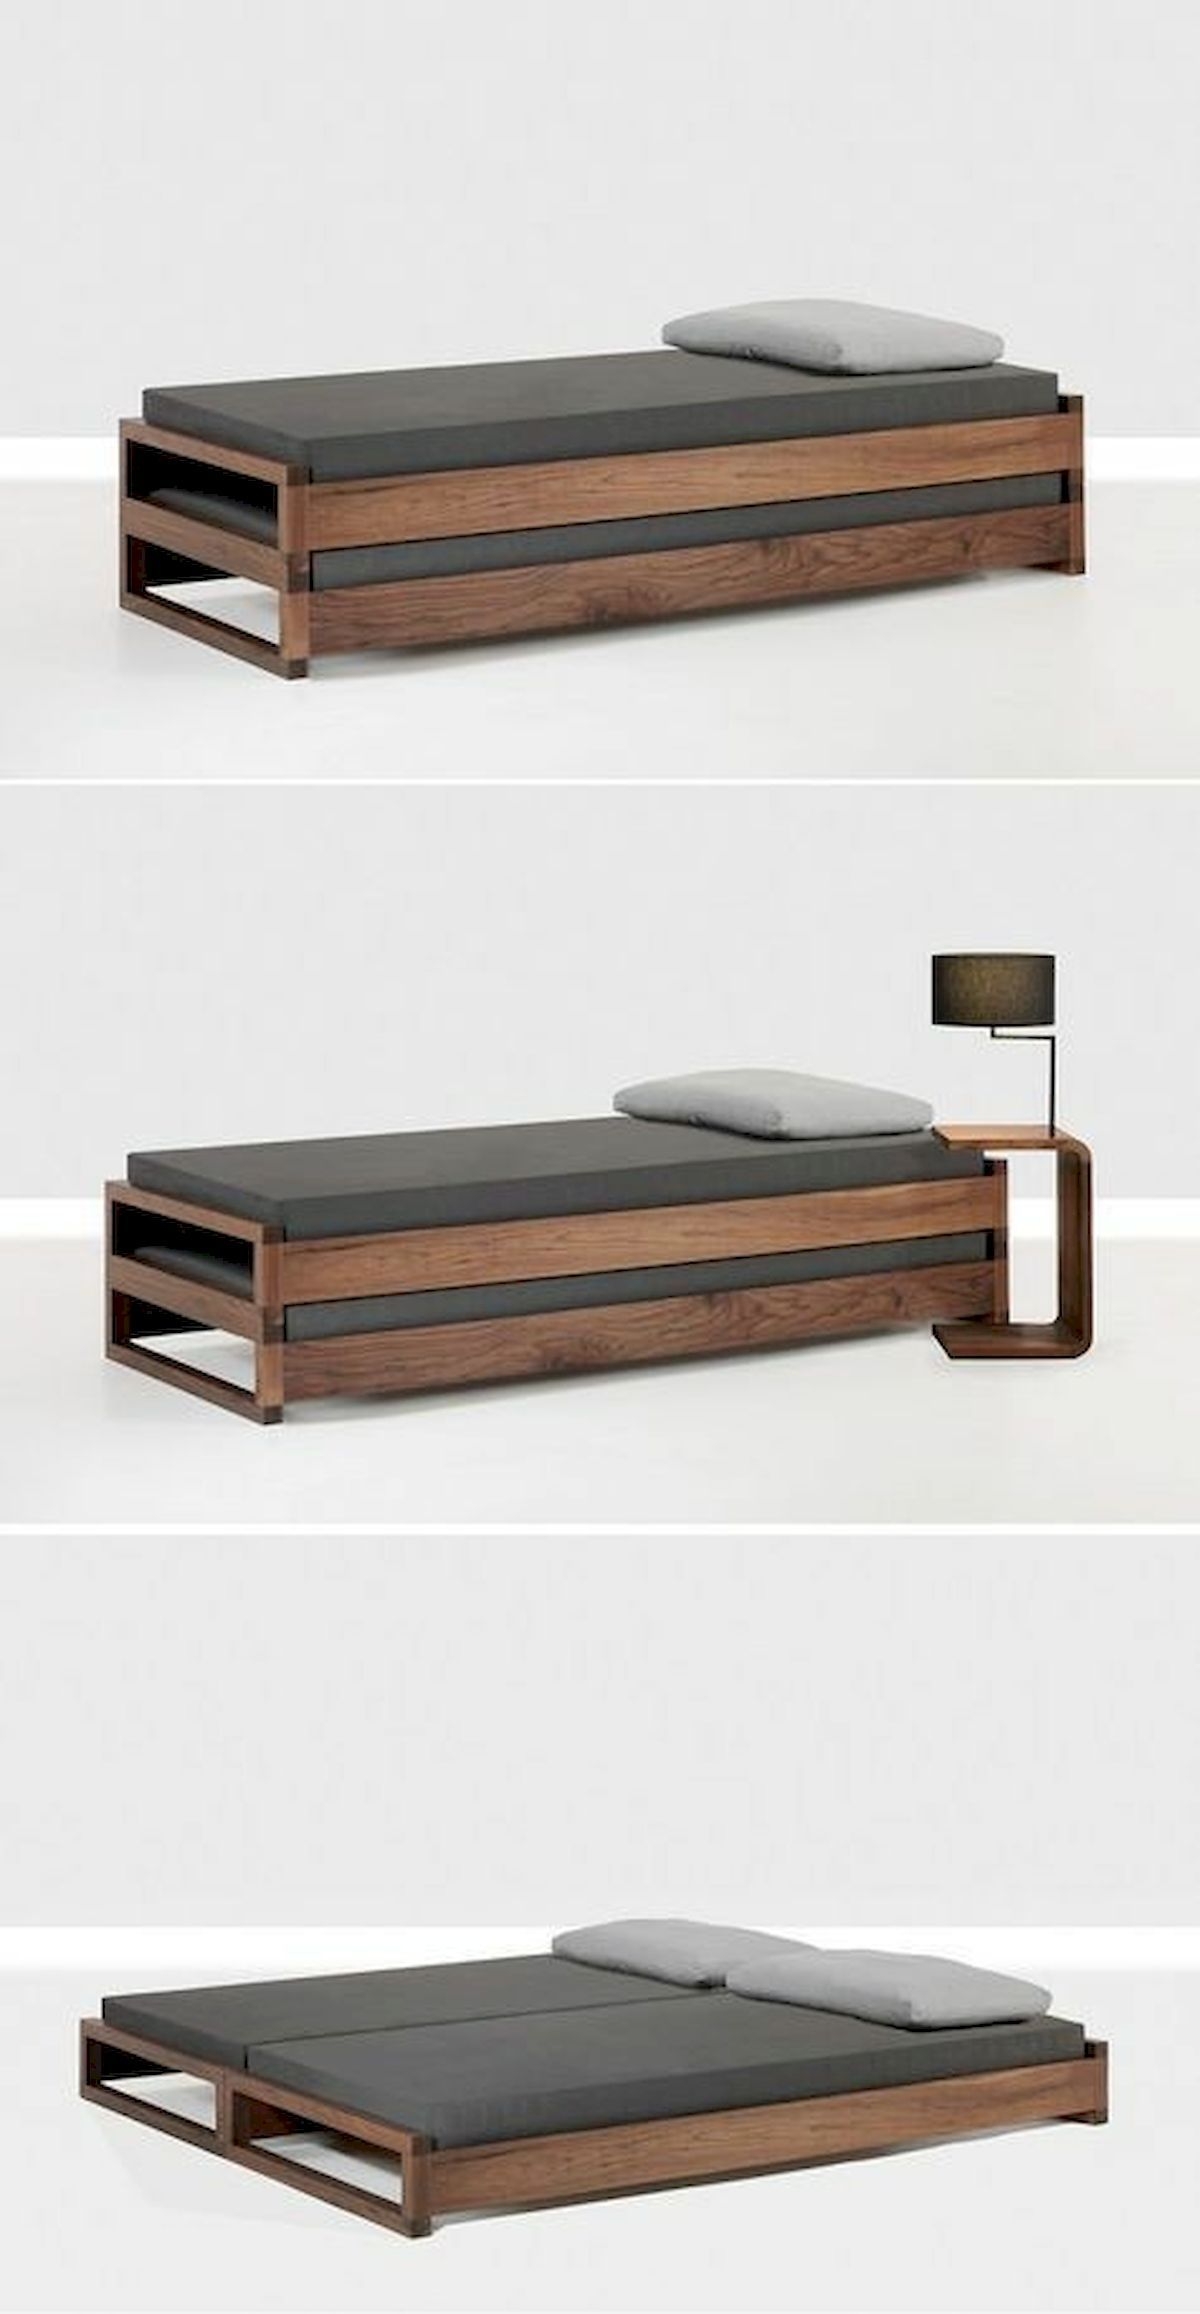 Space Saving Beds Visualhunt, Is A Double Bed Single